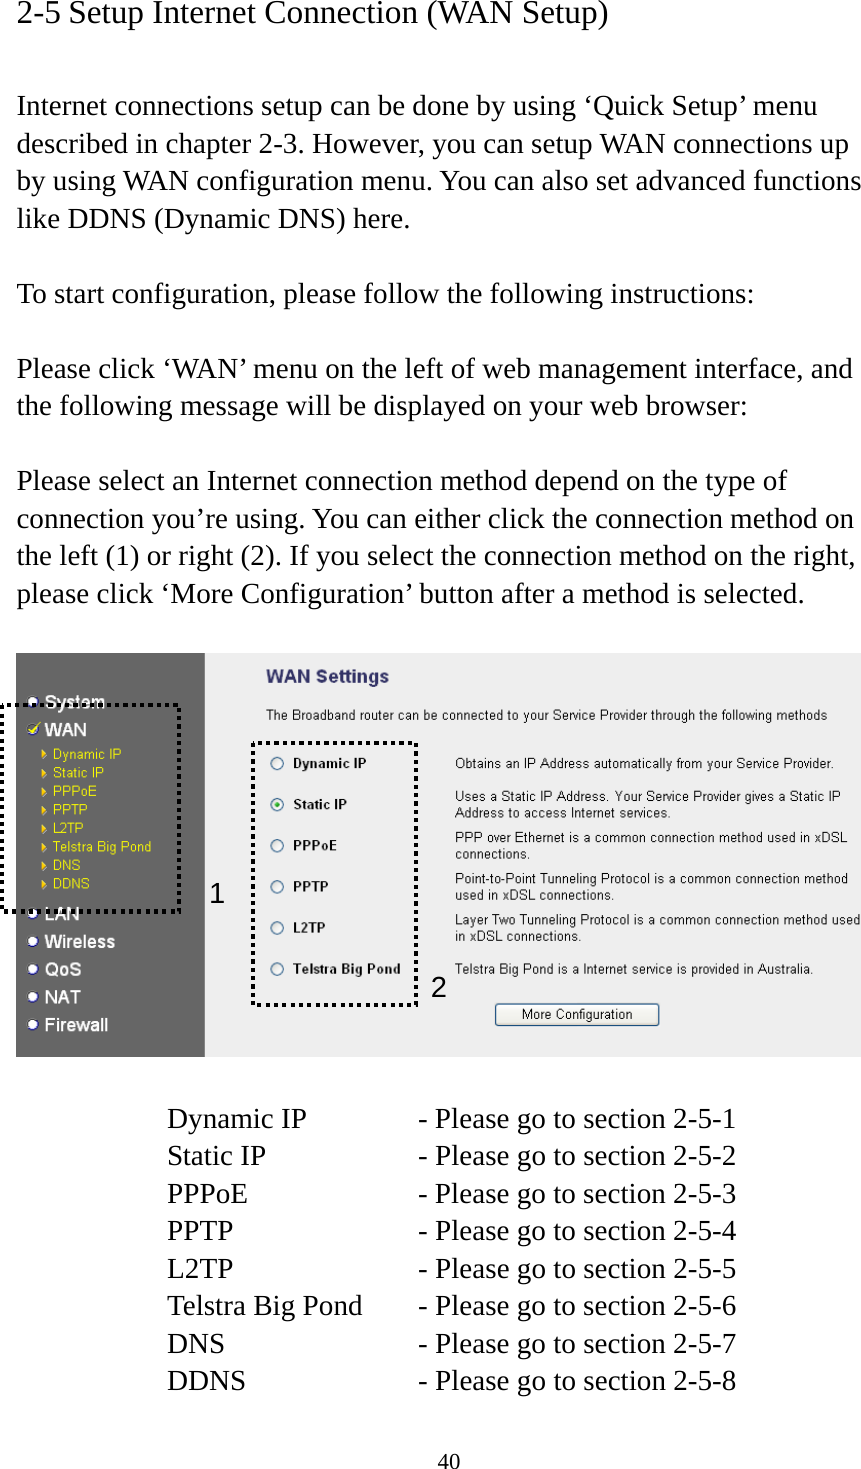 40 2-5 Setup Internet Connection (WAN Setup)  Internet connections setup can be done by using ‘Quick Setup’ menu described in chapter 2-3. However, you can setup WAN connections up by using WAN configuration menu. You can also set advanced functions like DDNS (Dynamic DNS) here.  To start configuration, please follow the following instructions:  Please click ‘WAN’ menu on the left of web management interface, and the following message will be displayed on your web browser:  Please select an Internet connection method depend on the type of connection you’re using. You can either click the connection method on the left (1) or right (2). If you select the connection method on the right, please click ‘More Configuration’ button after a method is selected.    Dynamic IP     - Please go to section 2-5-1 Static IP       - Please go to section 2-5-2 PPPoE        - Please go to section 2-5-3 PPTP        - Please go to section 2-5-4 L2TP        - Please go to section 2-5-5 Telstra Big Pond   - Please go to section 2-5-6 DNS        - Please go to section 2-5-7 DDNS        - Please go to section 2-5-8 12